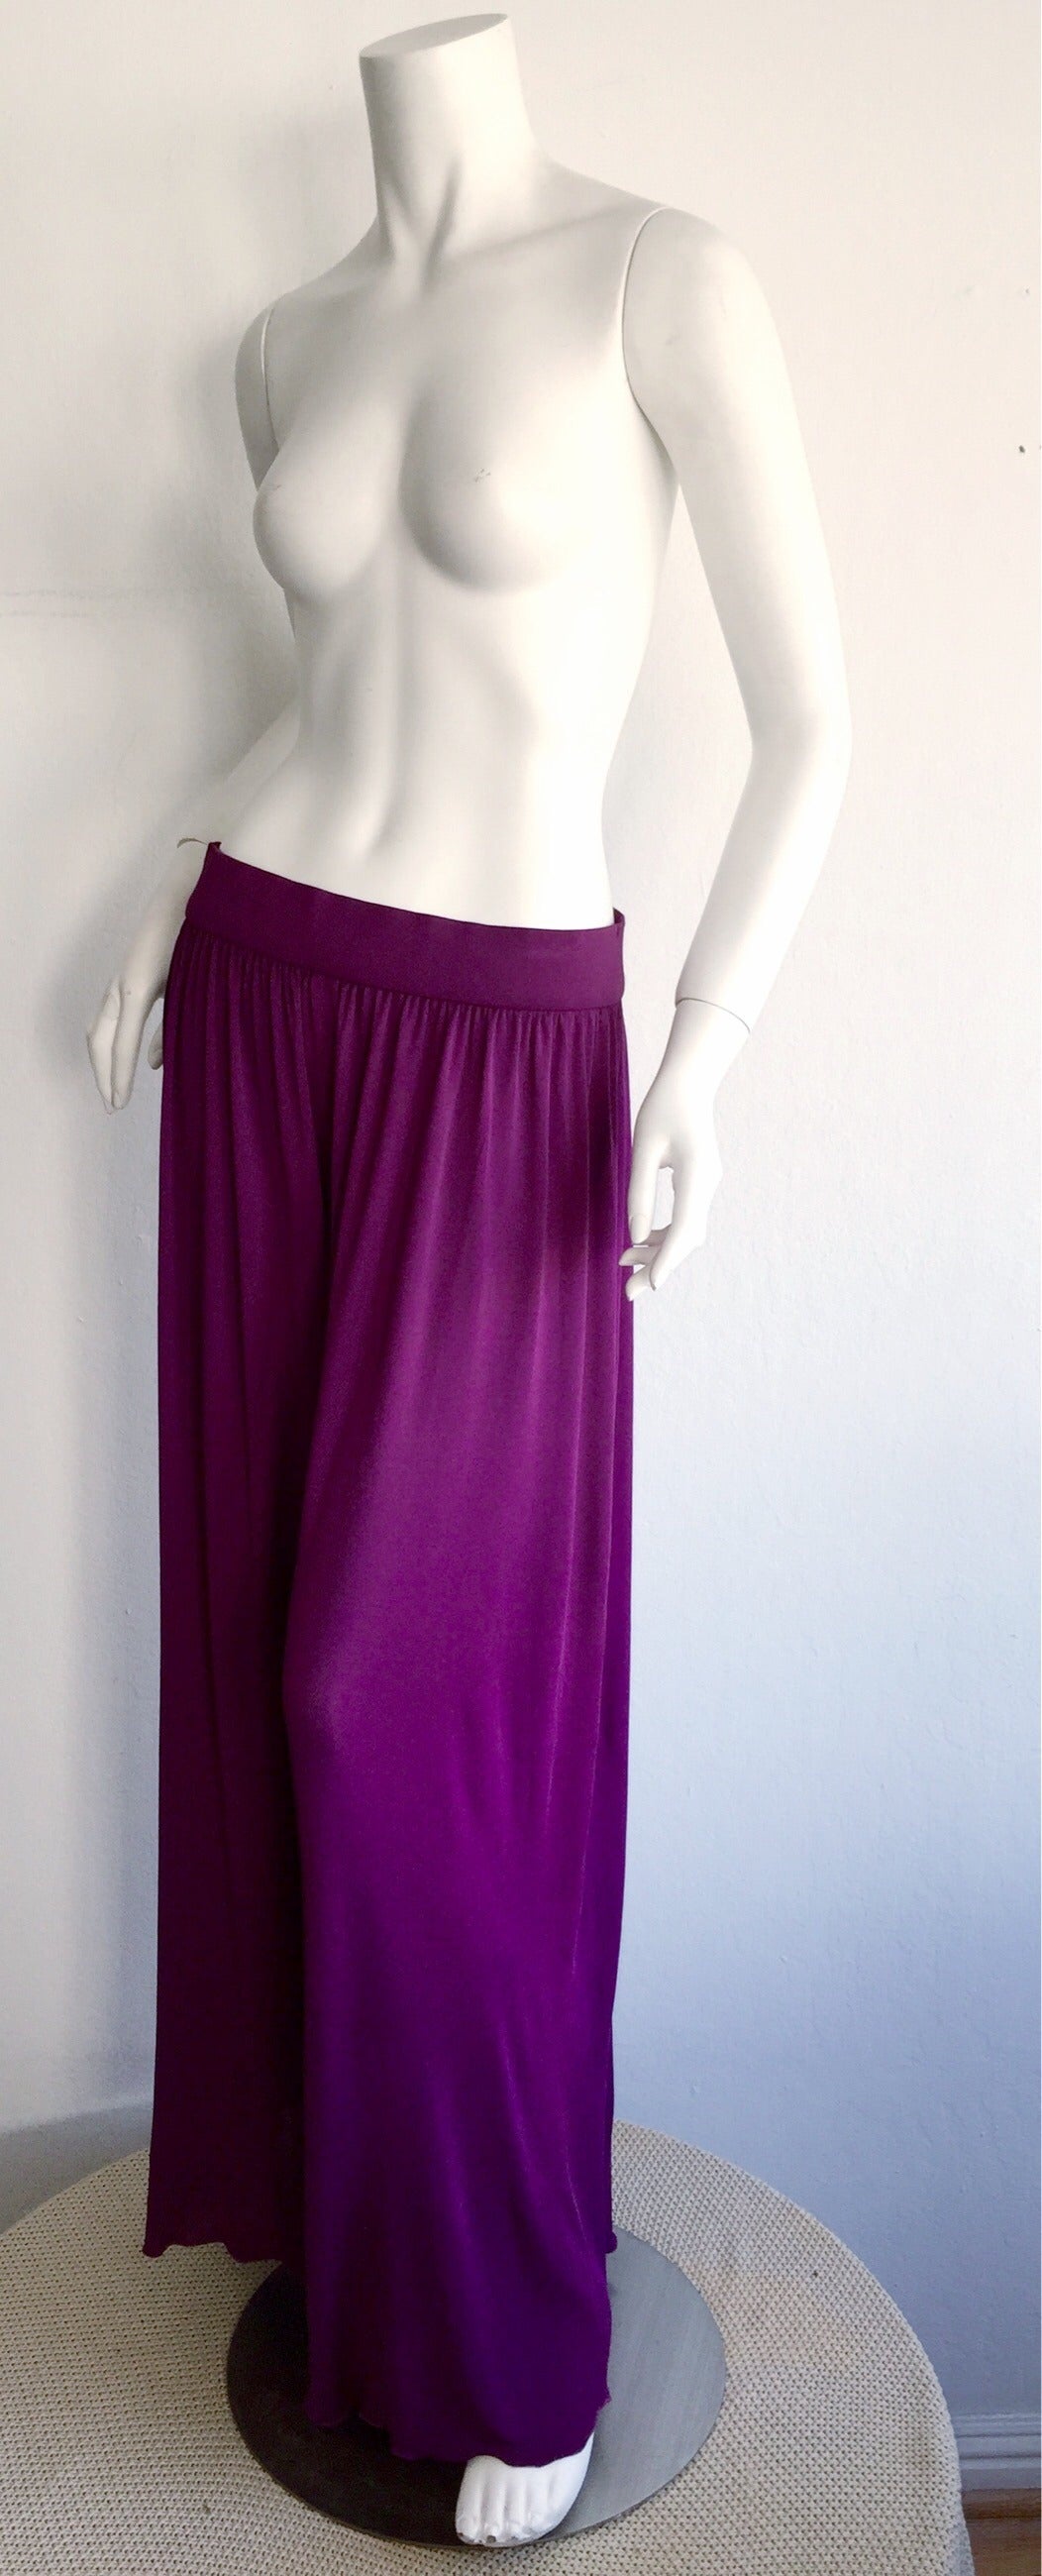 Chic vintage Holly's Harp purple violet silk jersey palazzo pants! Double layered silk jersey, that is very flattering on. Easy to dress up or down. In great condition, with one small snag at back waistband, that is not noticeable.  Pictured vintage